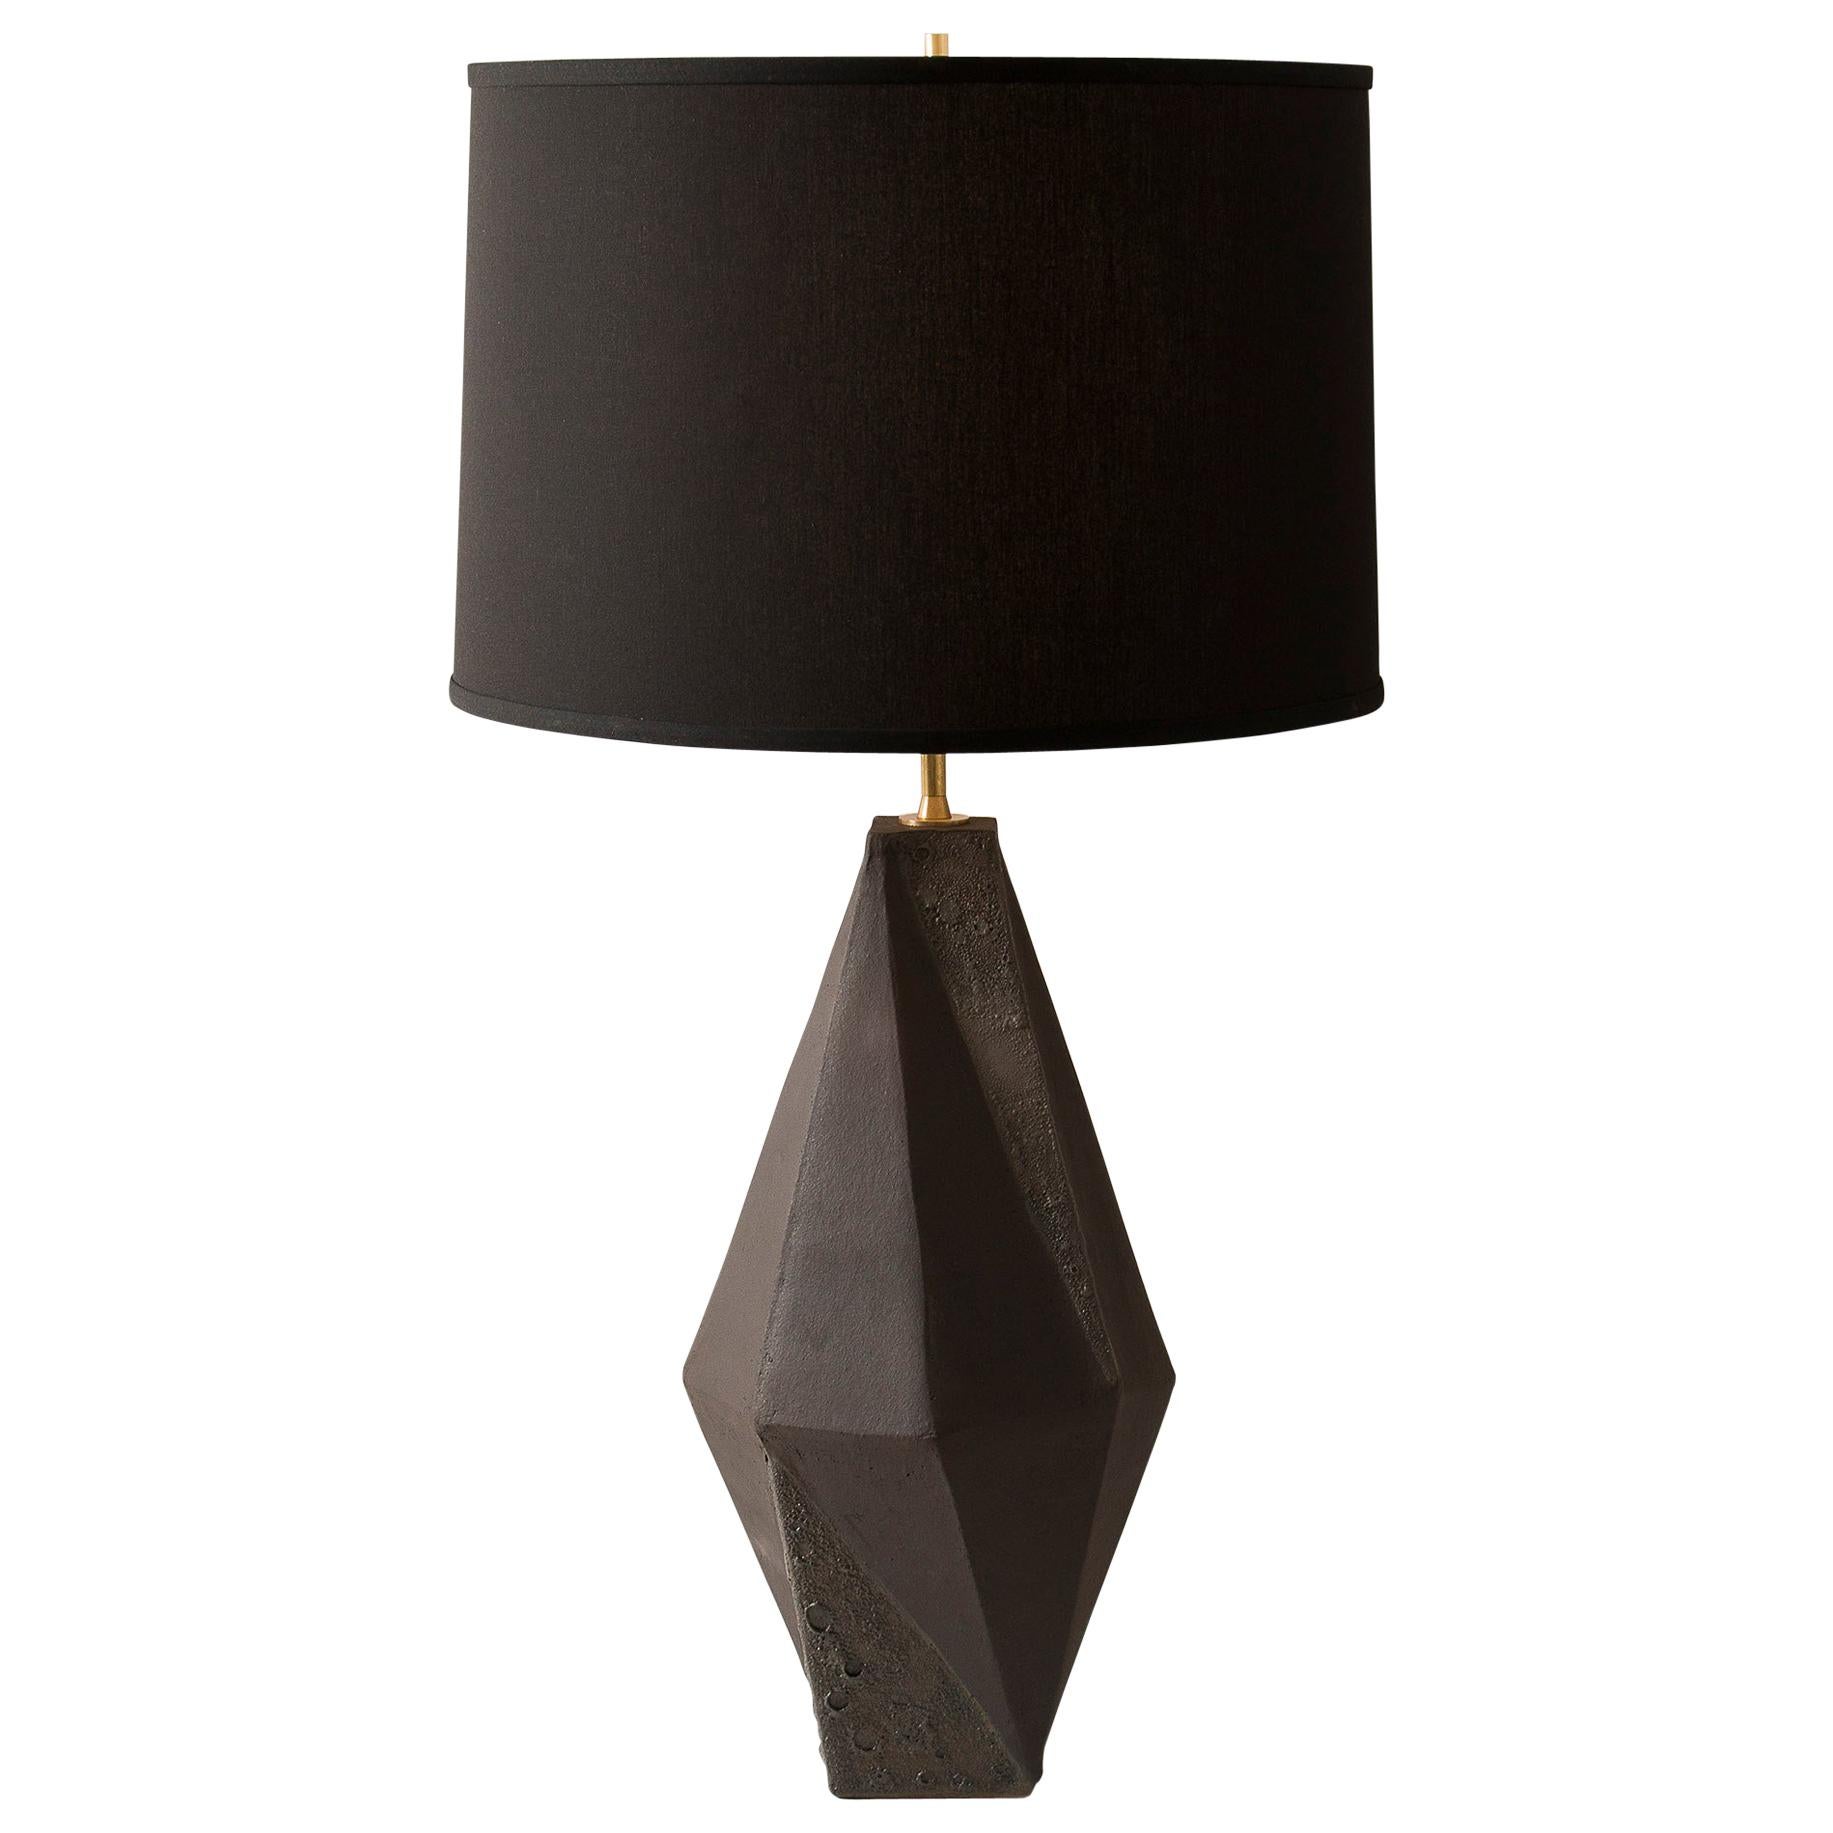 Warp - Matte and Textured Black Glazed Tall Geometric Ceramic Table Lamp For Sale